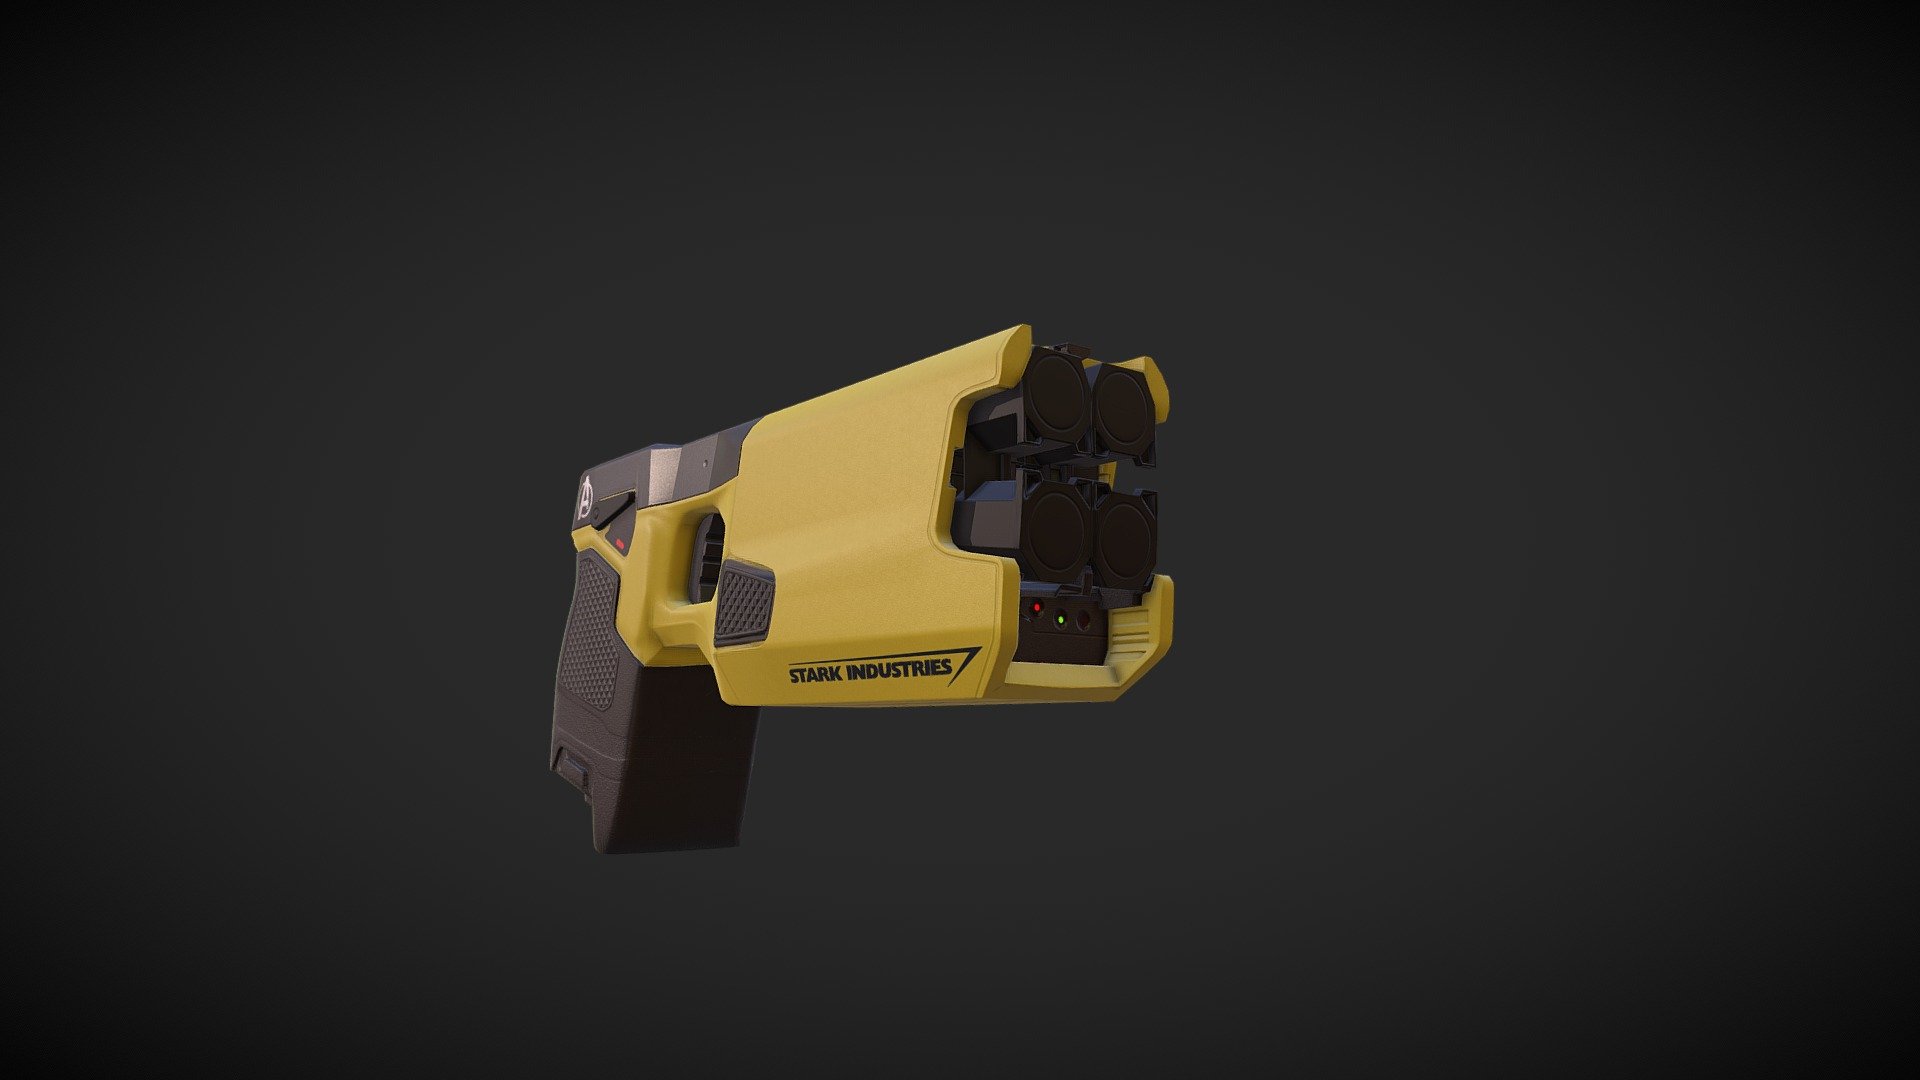 Axon's Taser7 with a twist. This is my first real hard suface model I have completed, I do hope to move foward from here and create much better models in the future 3d model